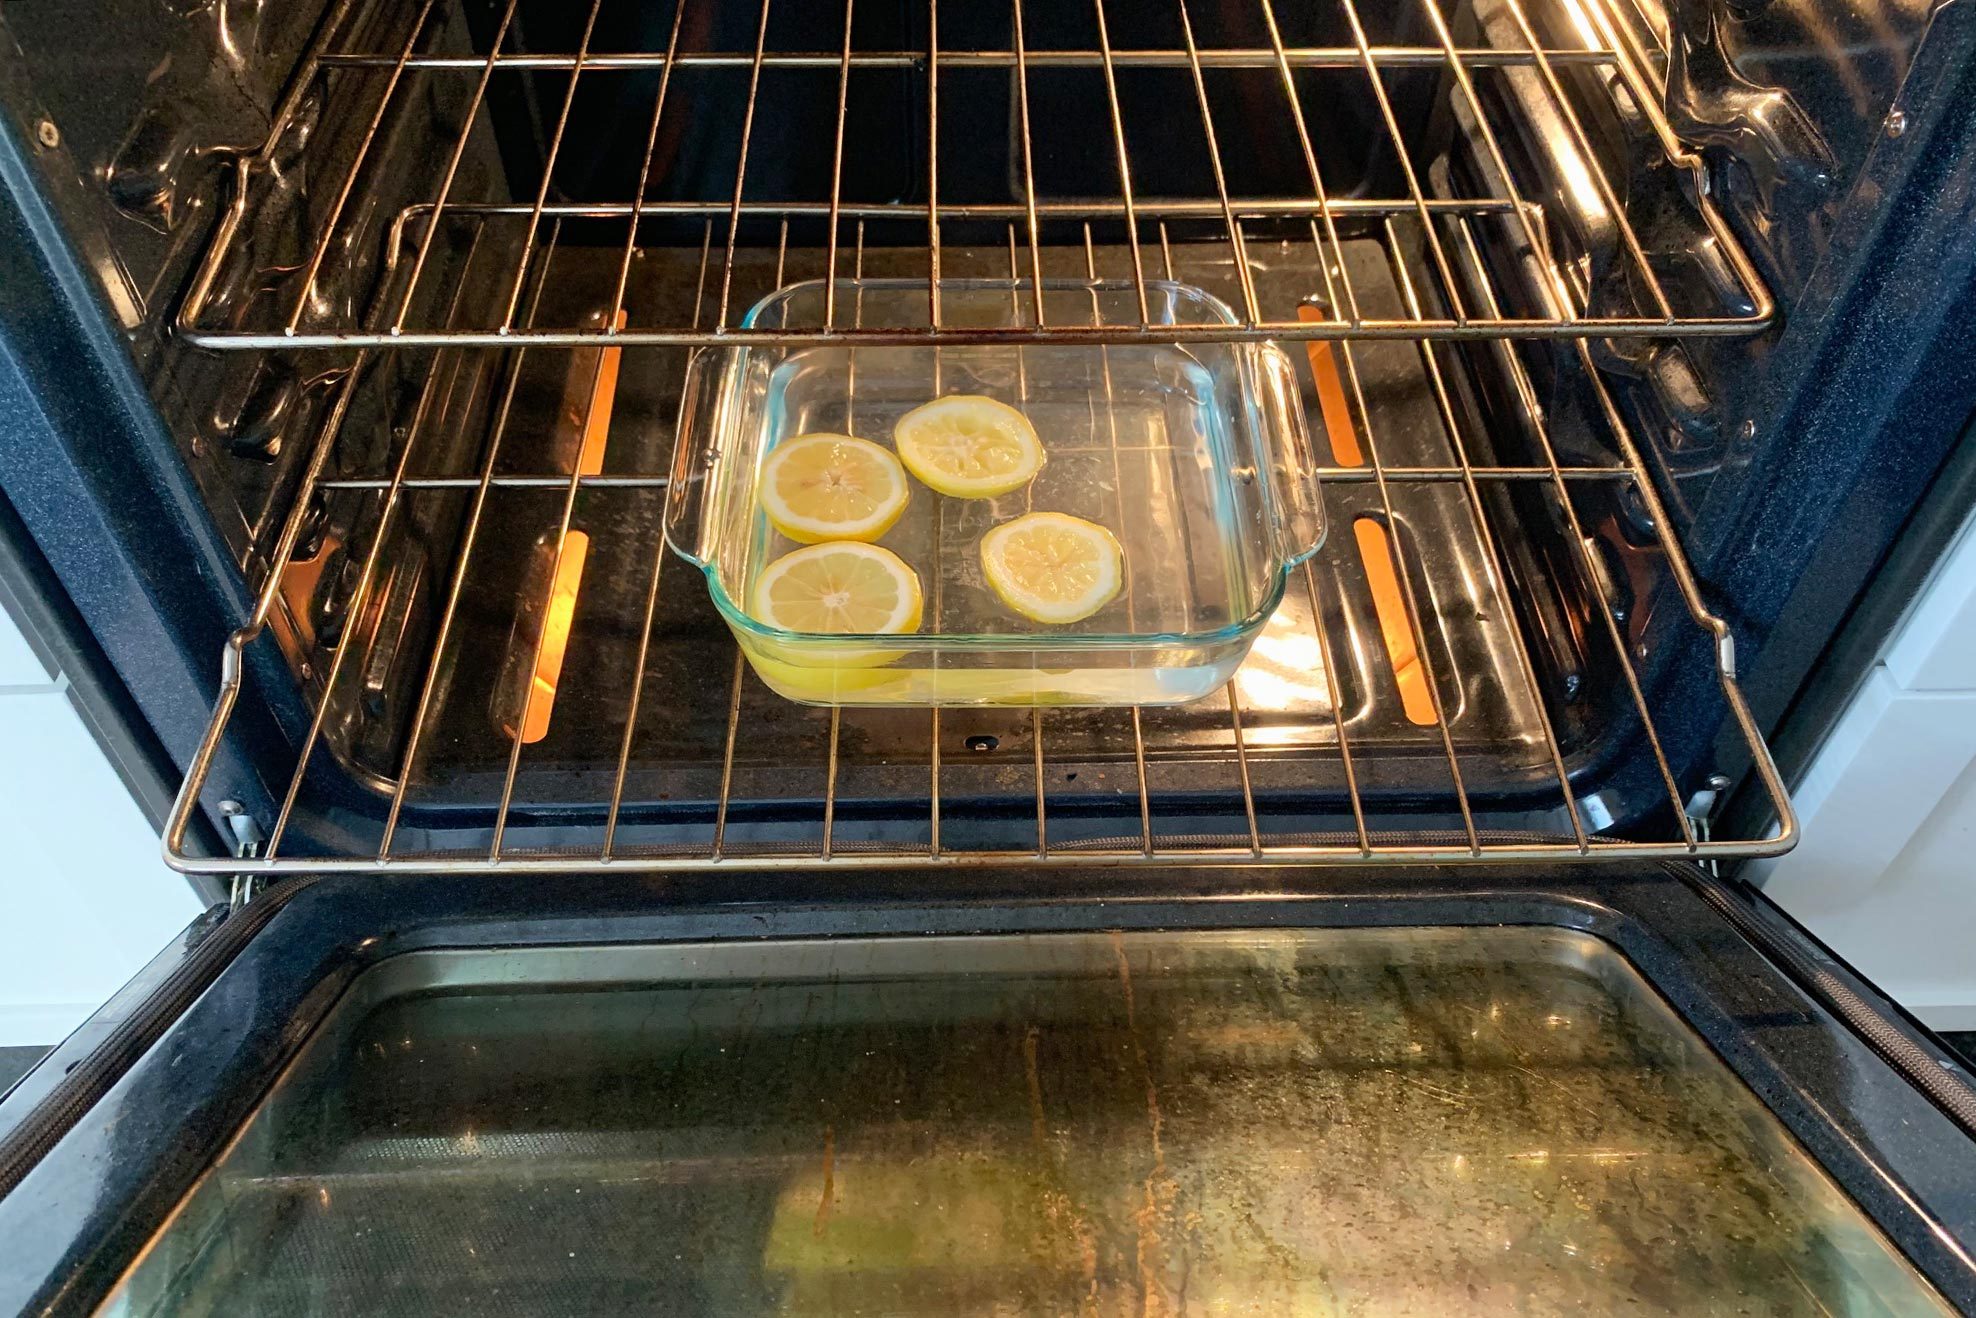 baking dish with lemon in the oven